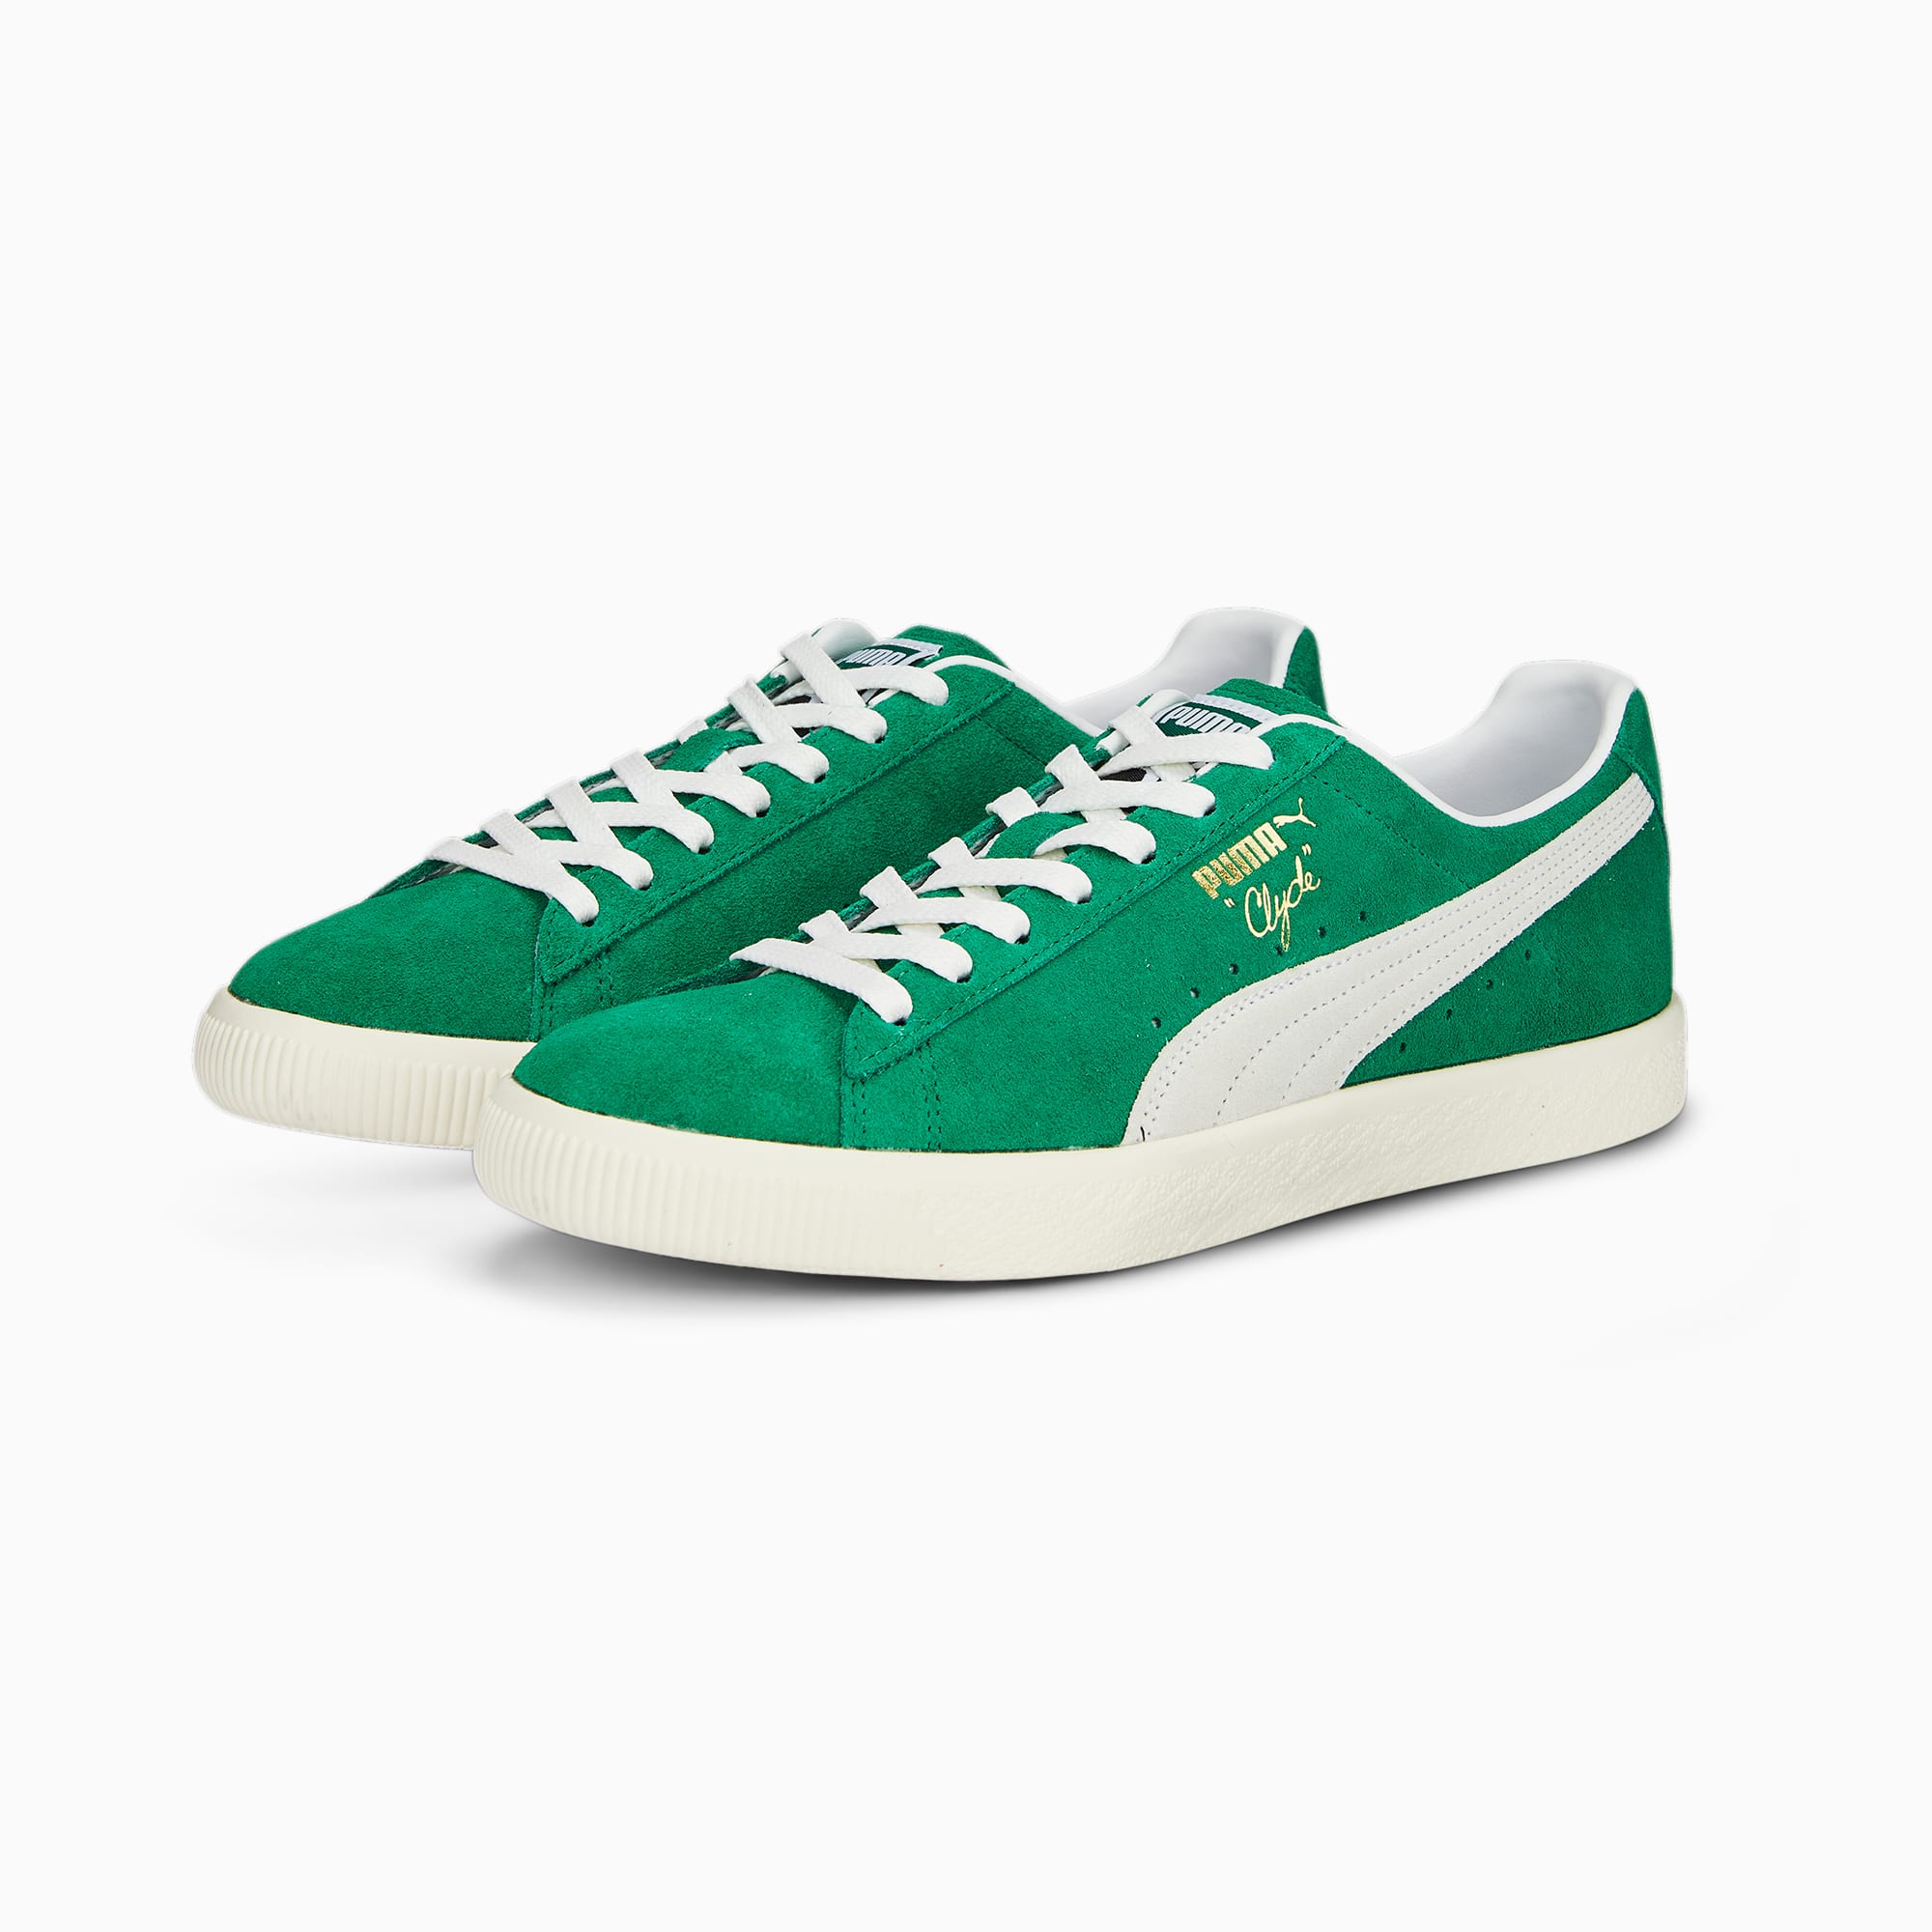 Women's PUMA Clyde OG Sneakers, Verdant Green/White/Pristine, Size 35,5, Shoes